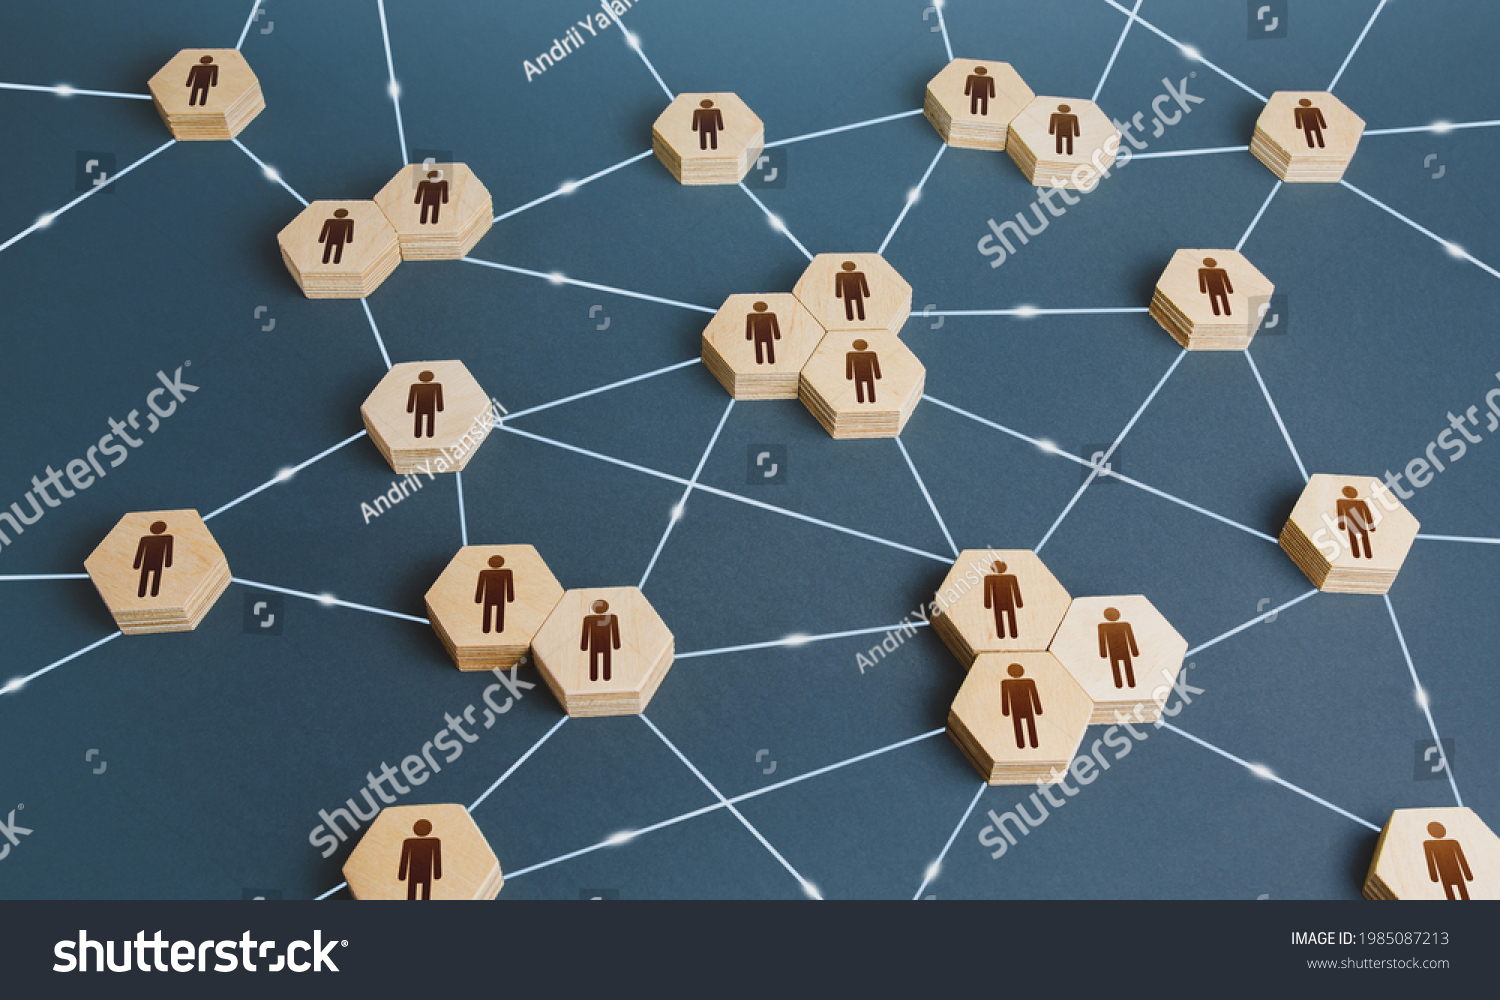 Network of interconnected people. Interactions between employees and working groups. Social business connections. Networking communication. Decentralized hierarchical system of company. Organization #1985087213